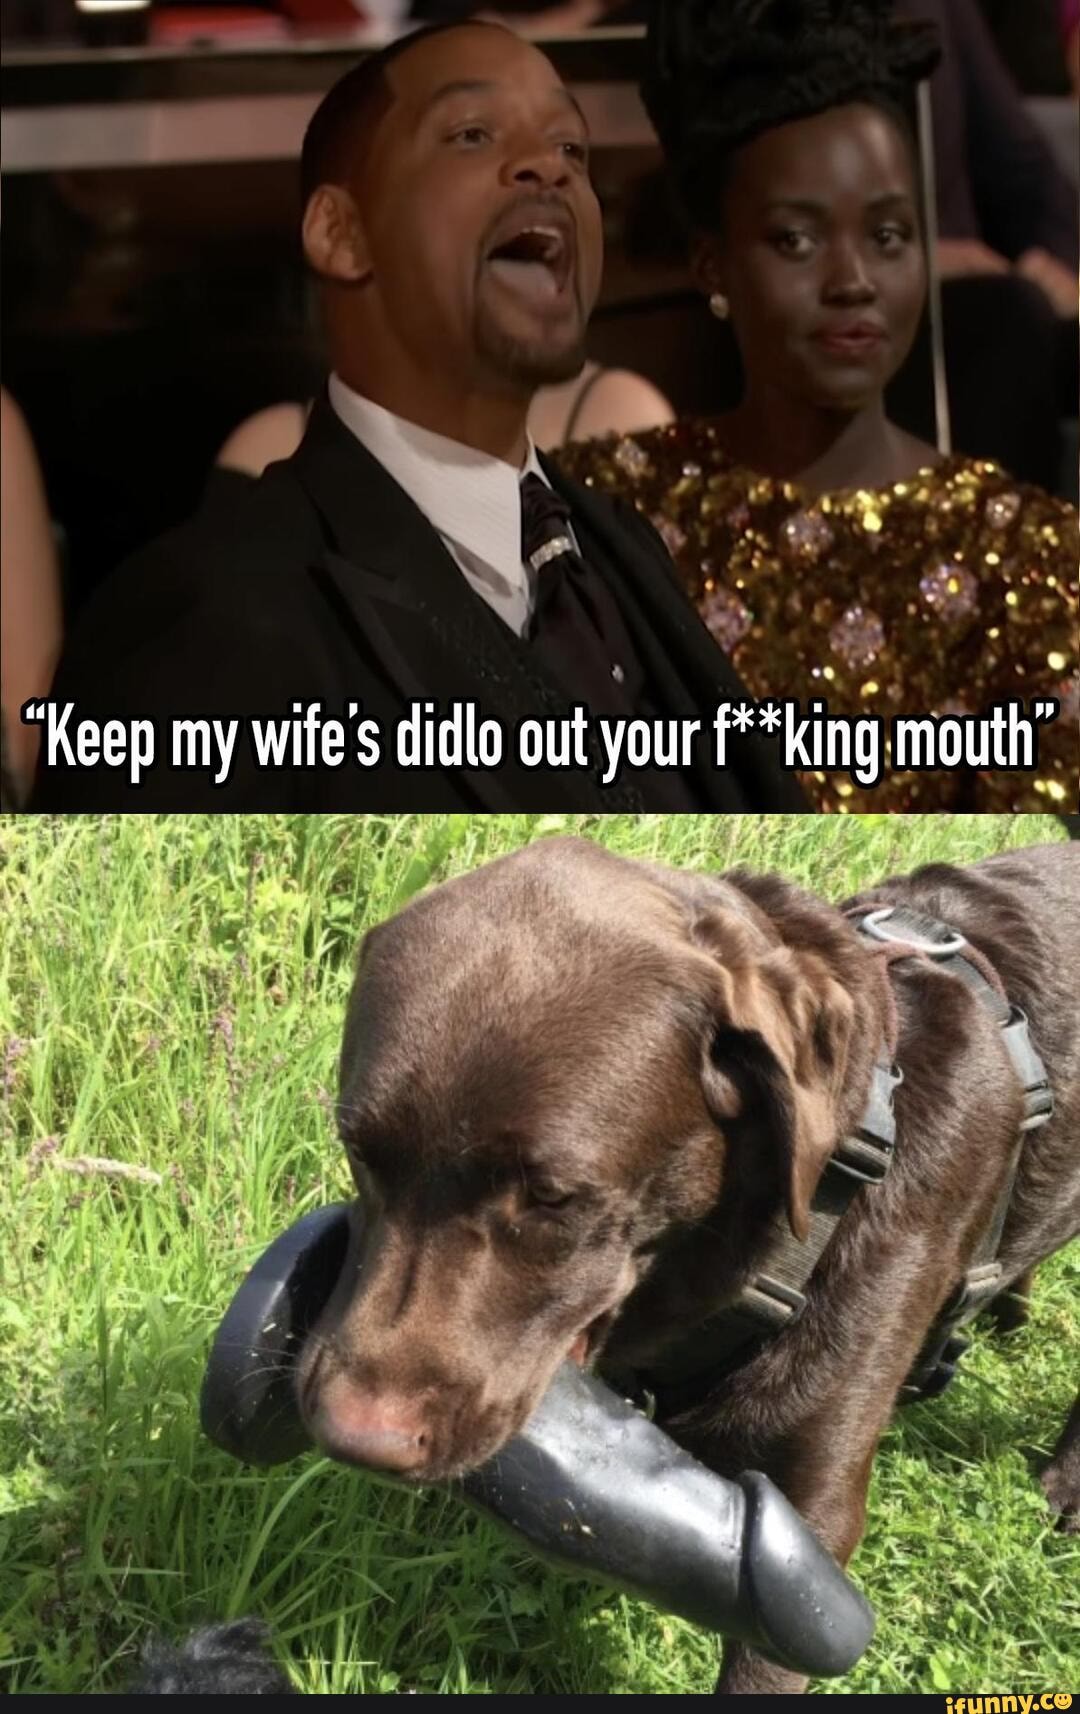 "Keep my wifes didlo out your "king mouth"